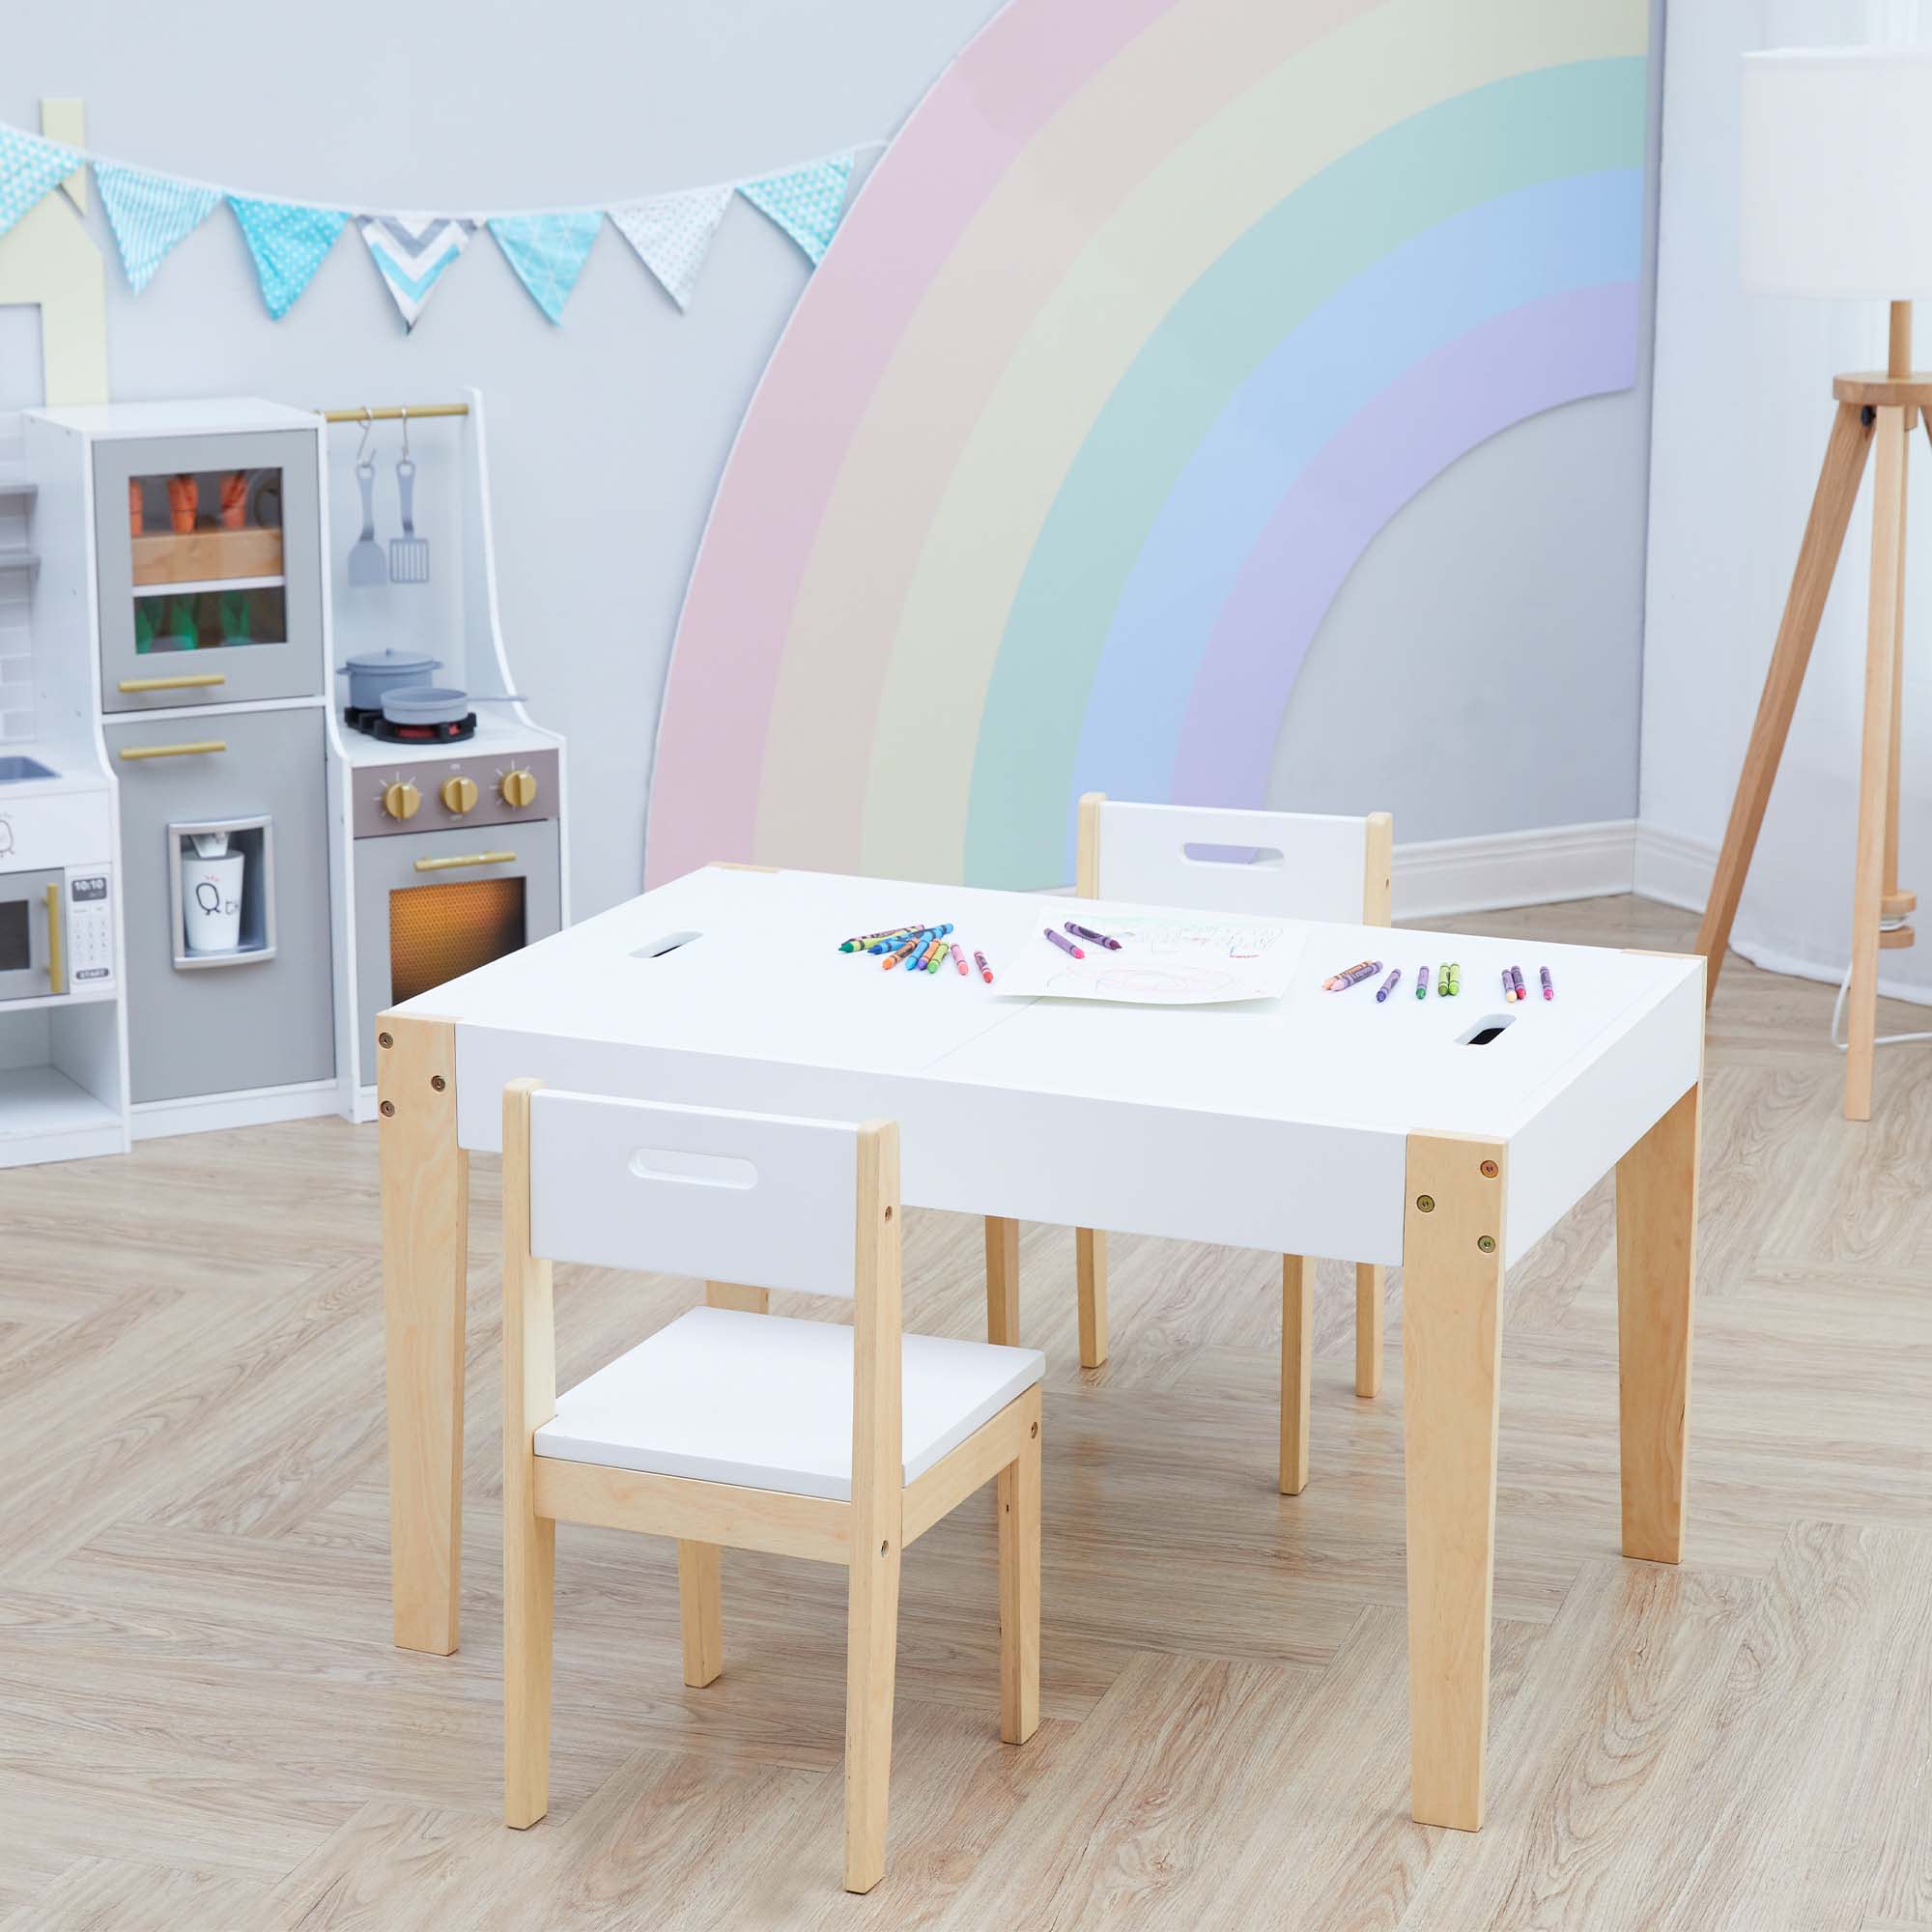 Fantasy Fields 3 Piece Play Table And Chairs Set With Storage And 2-way Chalkboard Table Top, White